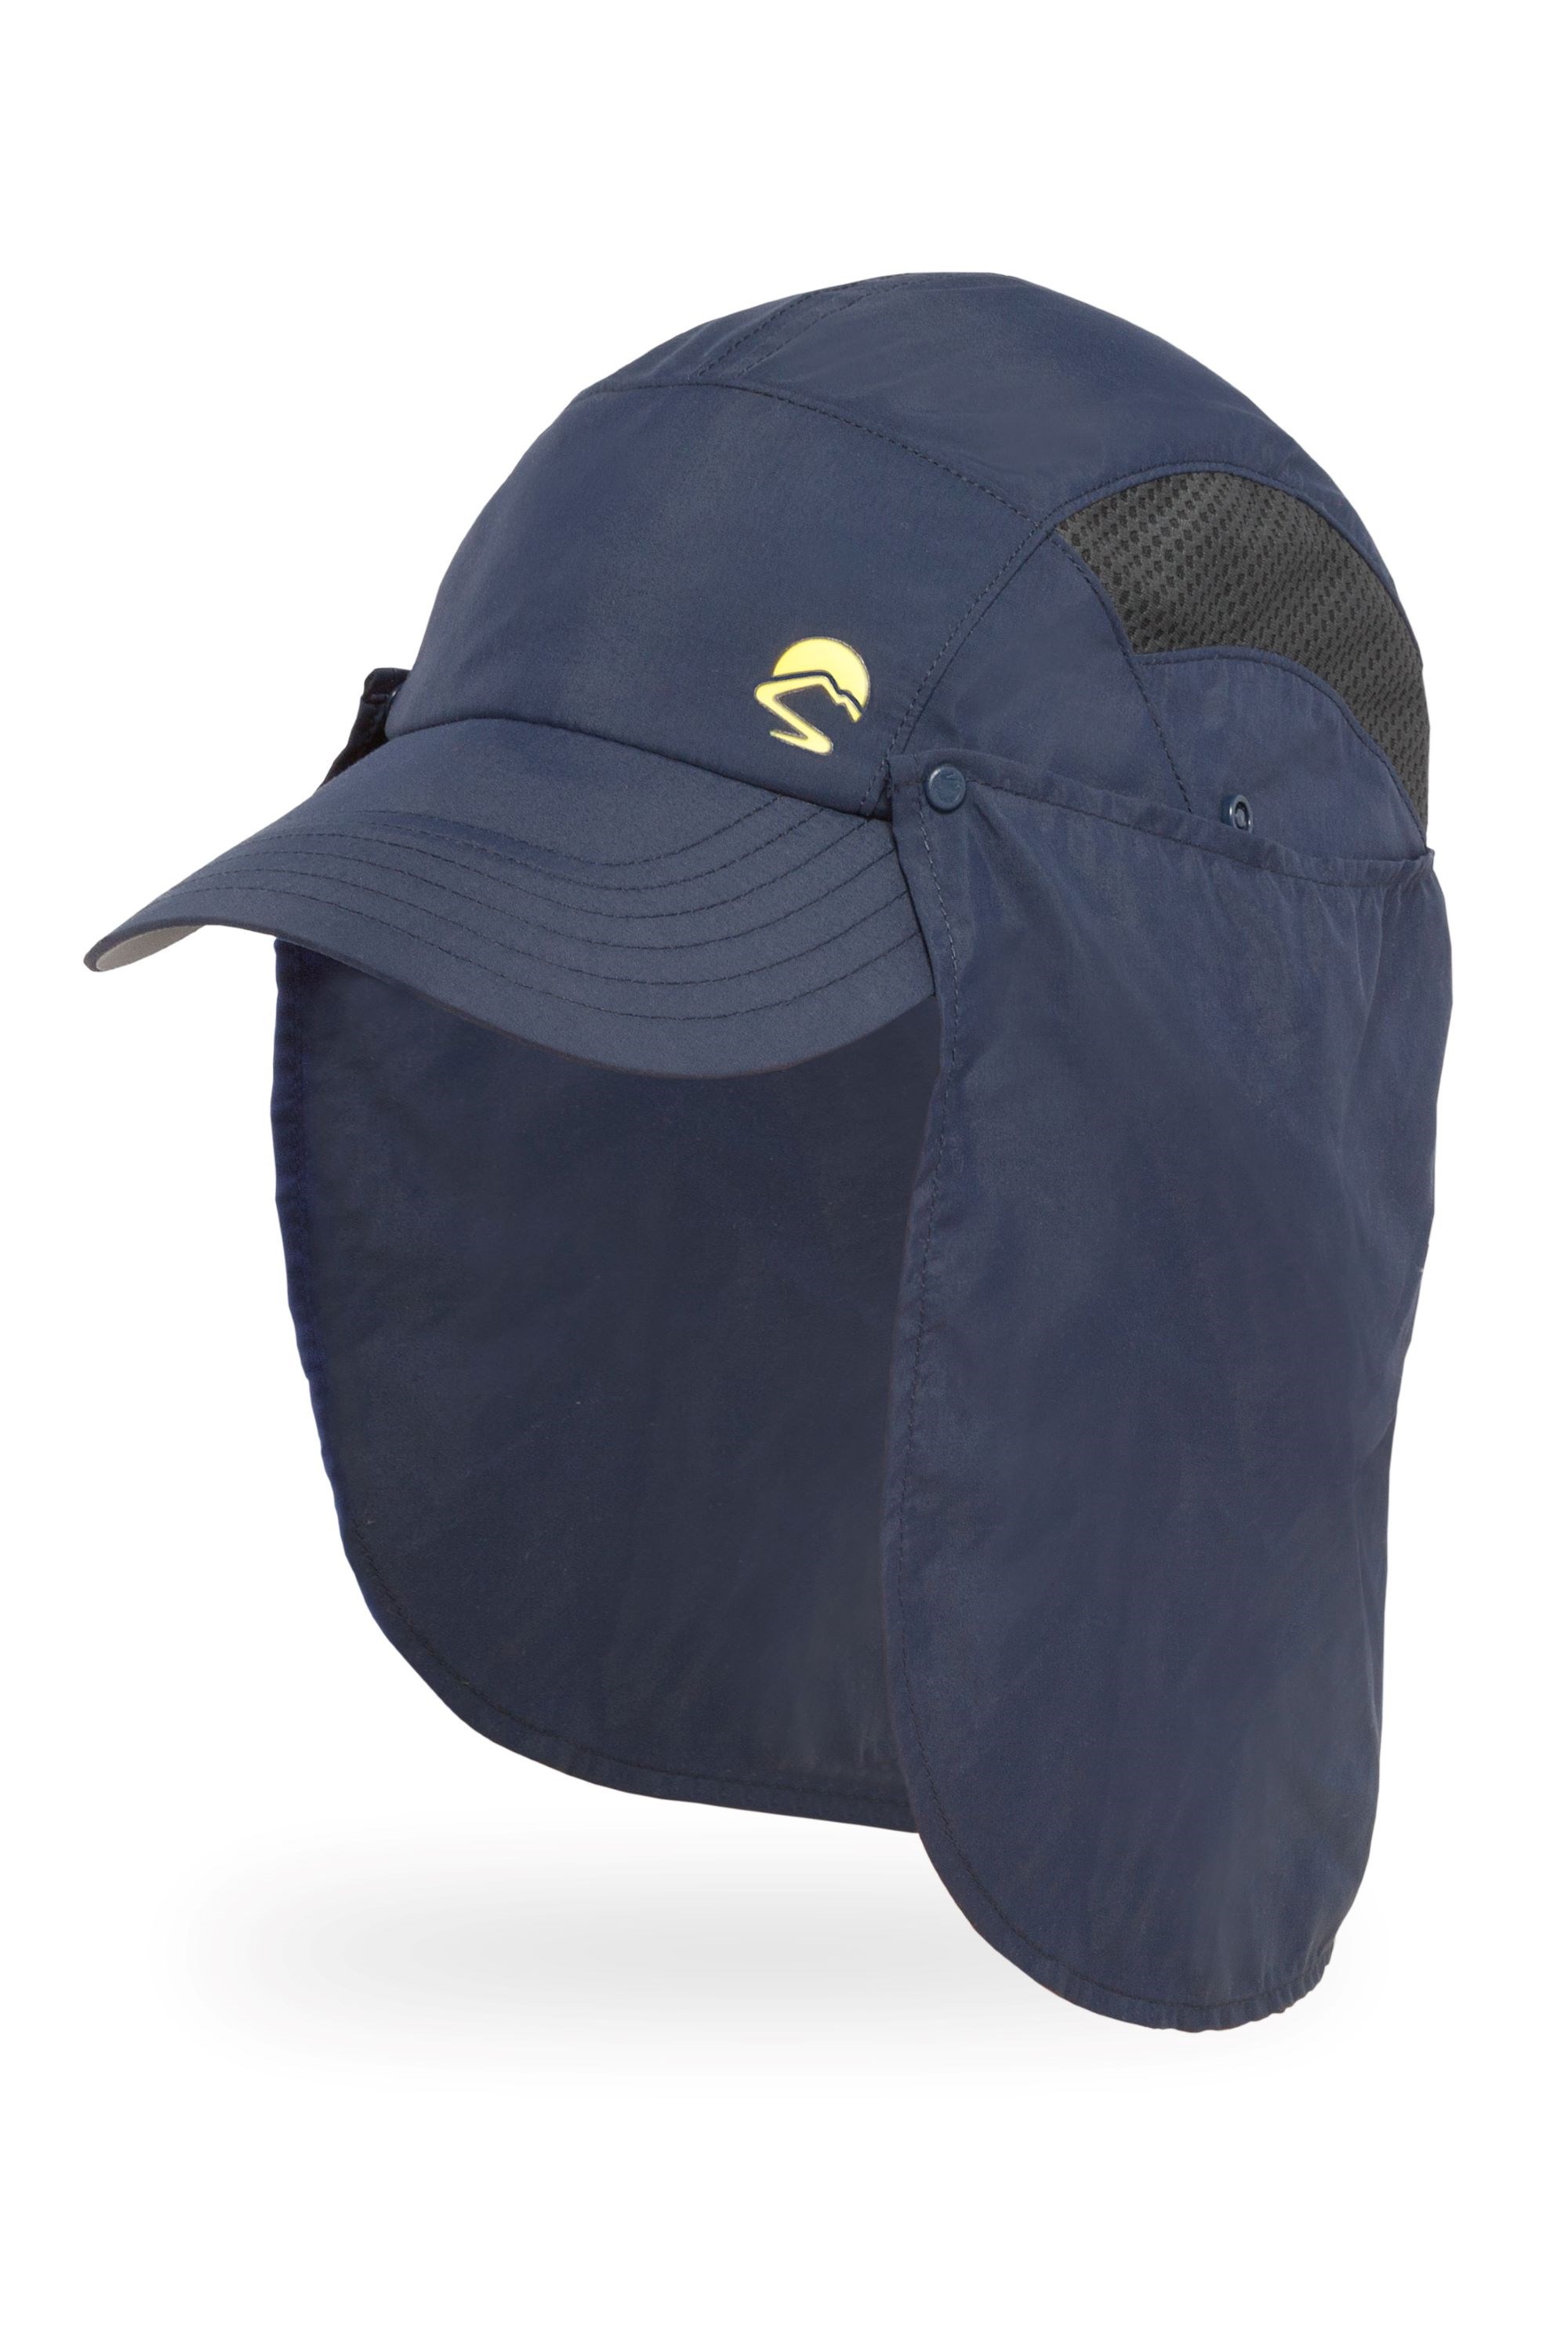 Adventure Stow Cap with Ear Flaps and Neck Cape -